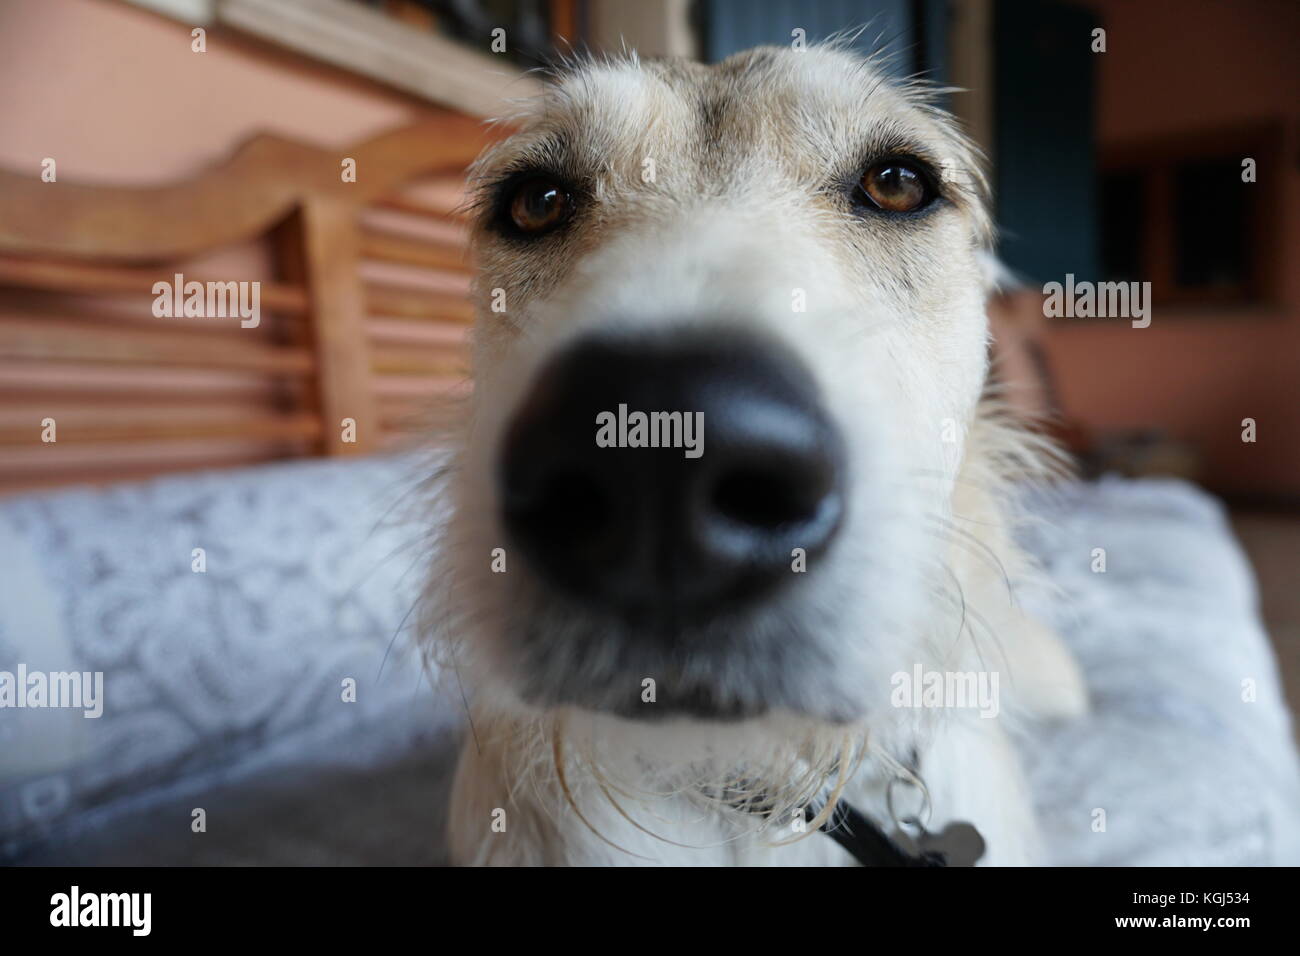 Photo of a young dog's snout. The dog seems interested about the camera. Stock Photo